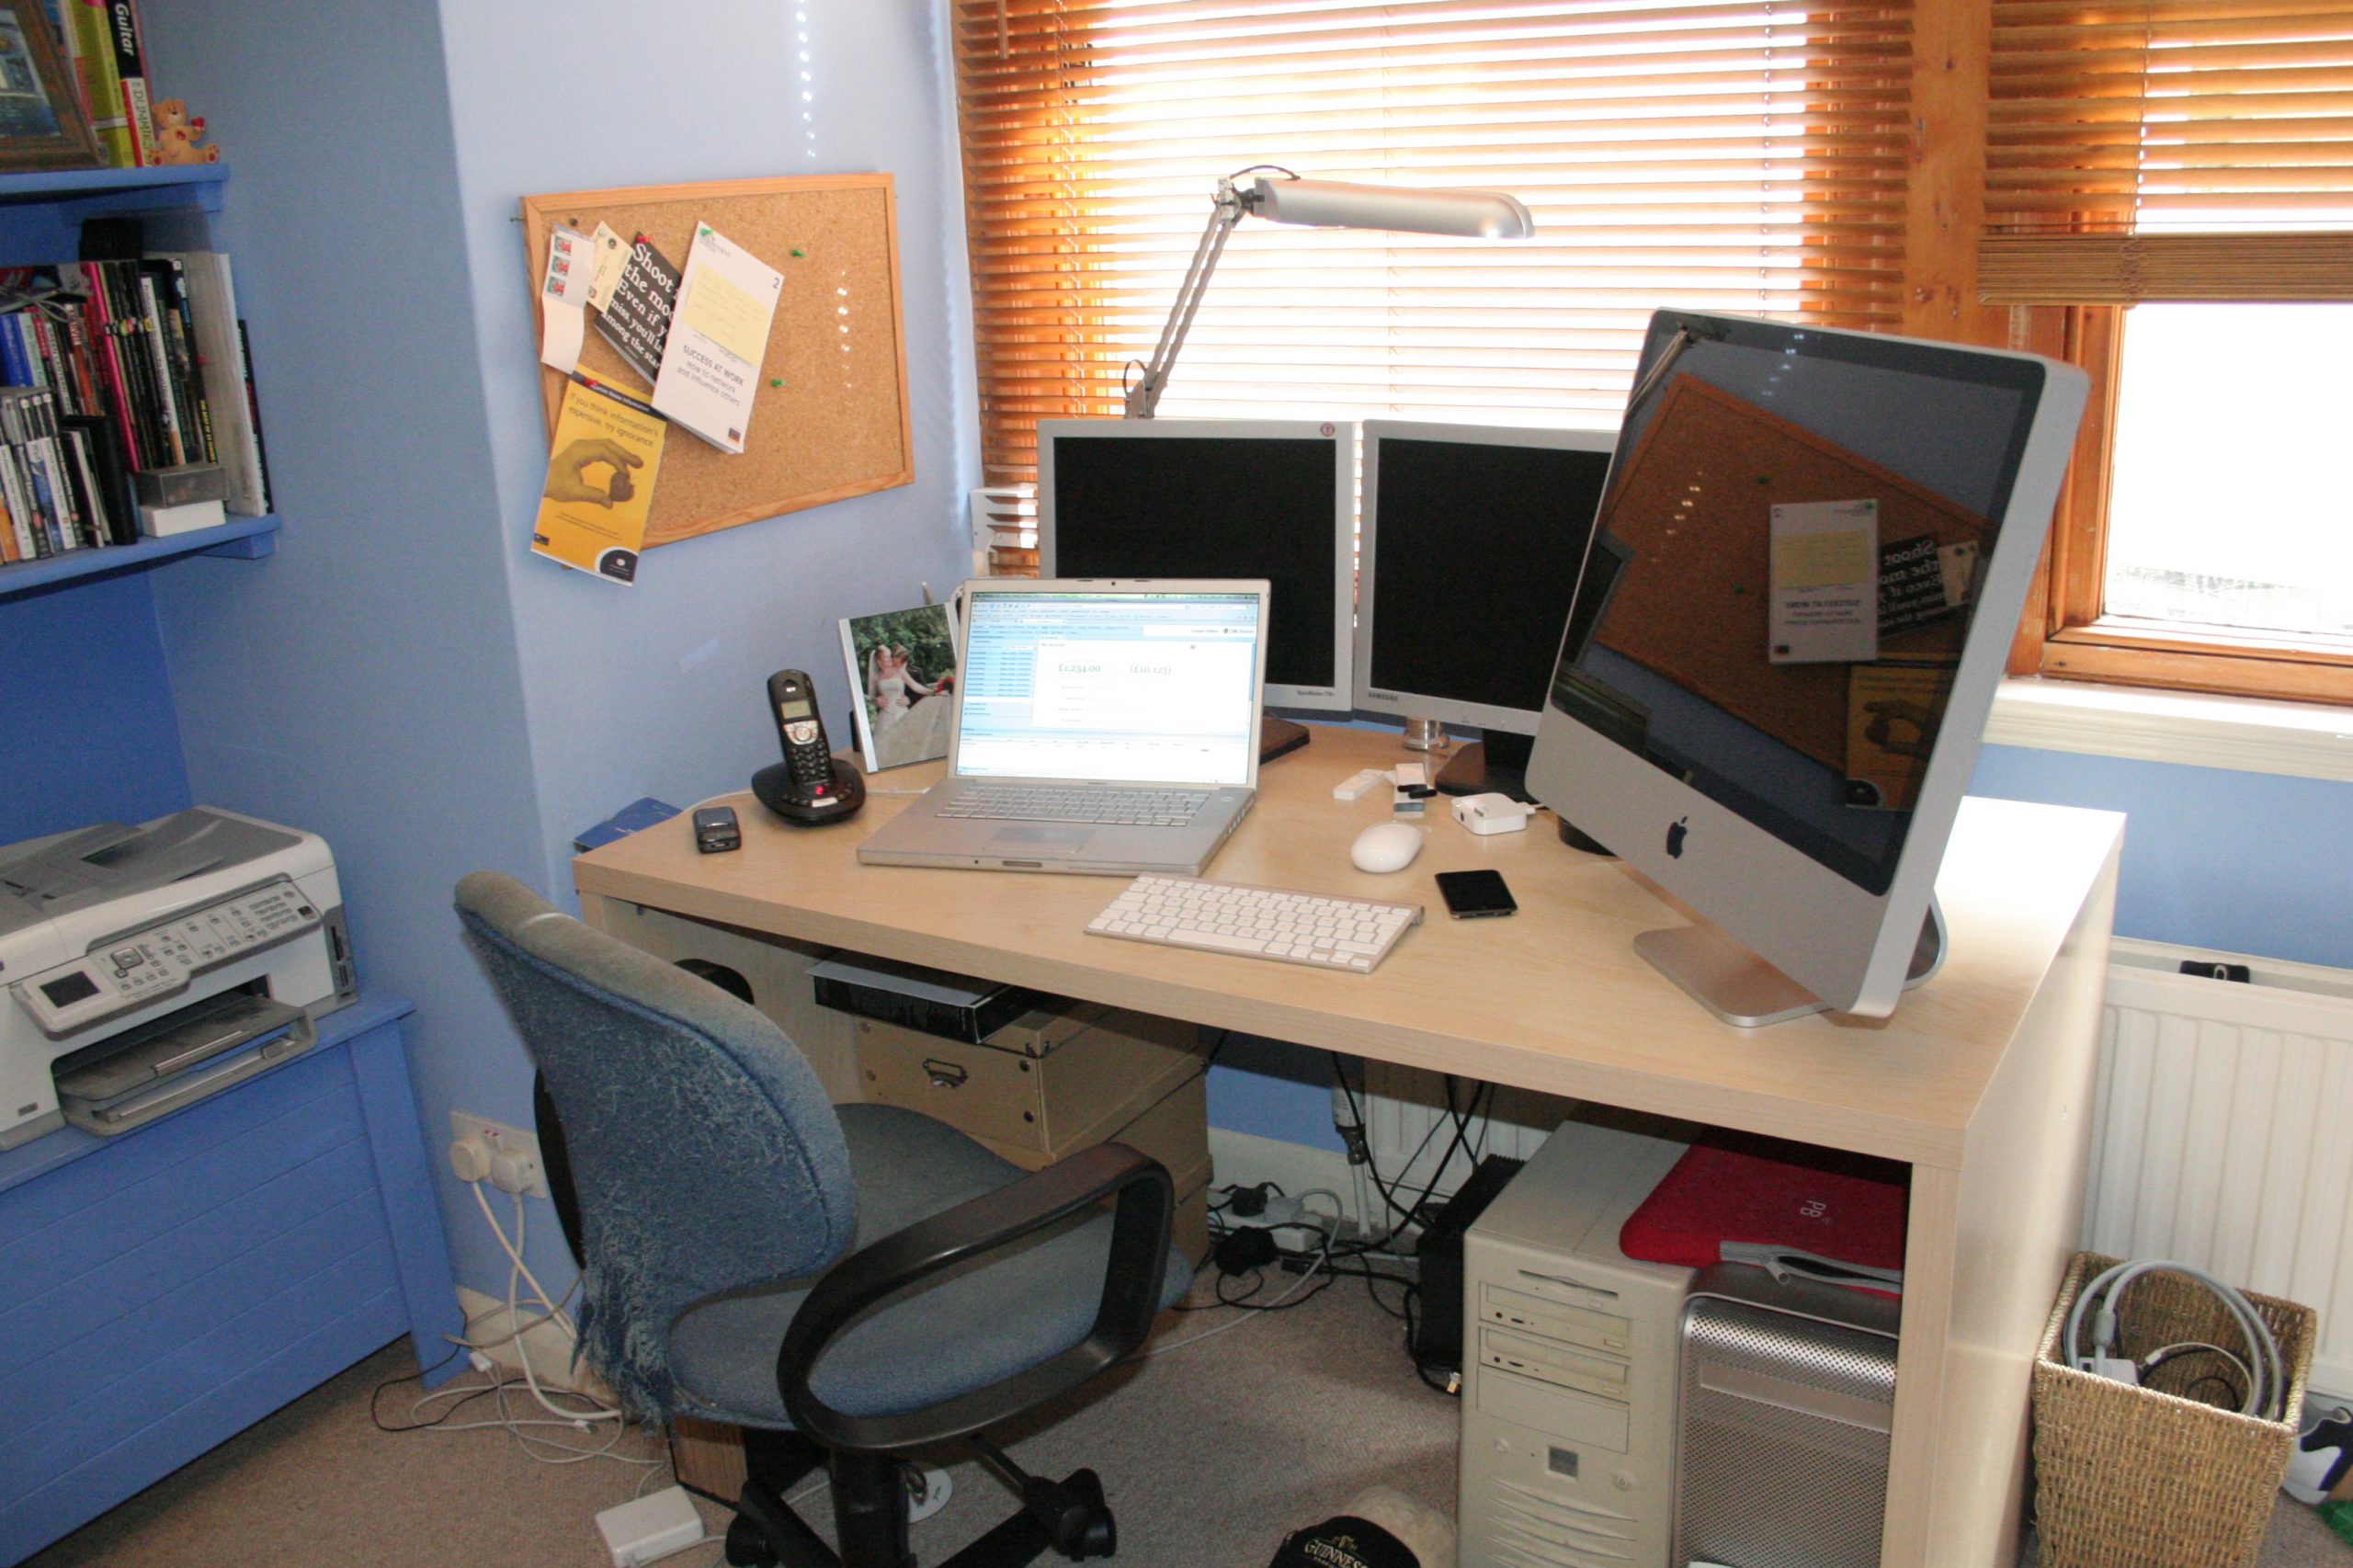 A wooden desk holds up the equipment for an at home office